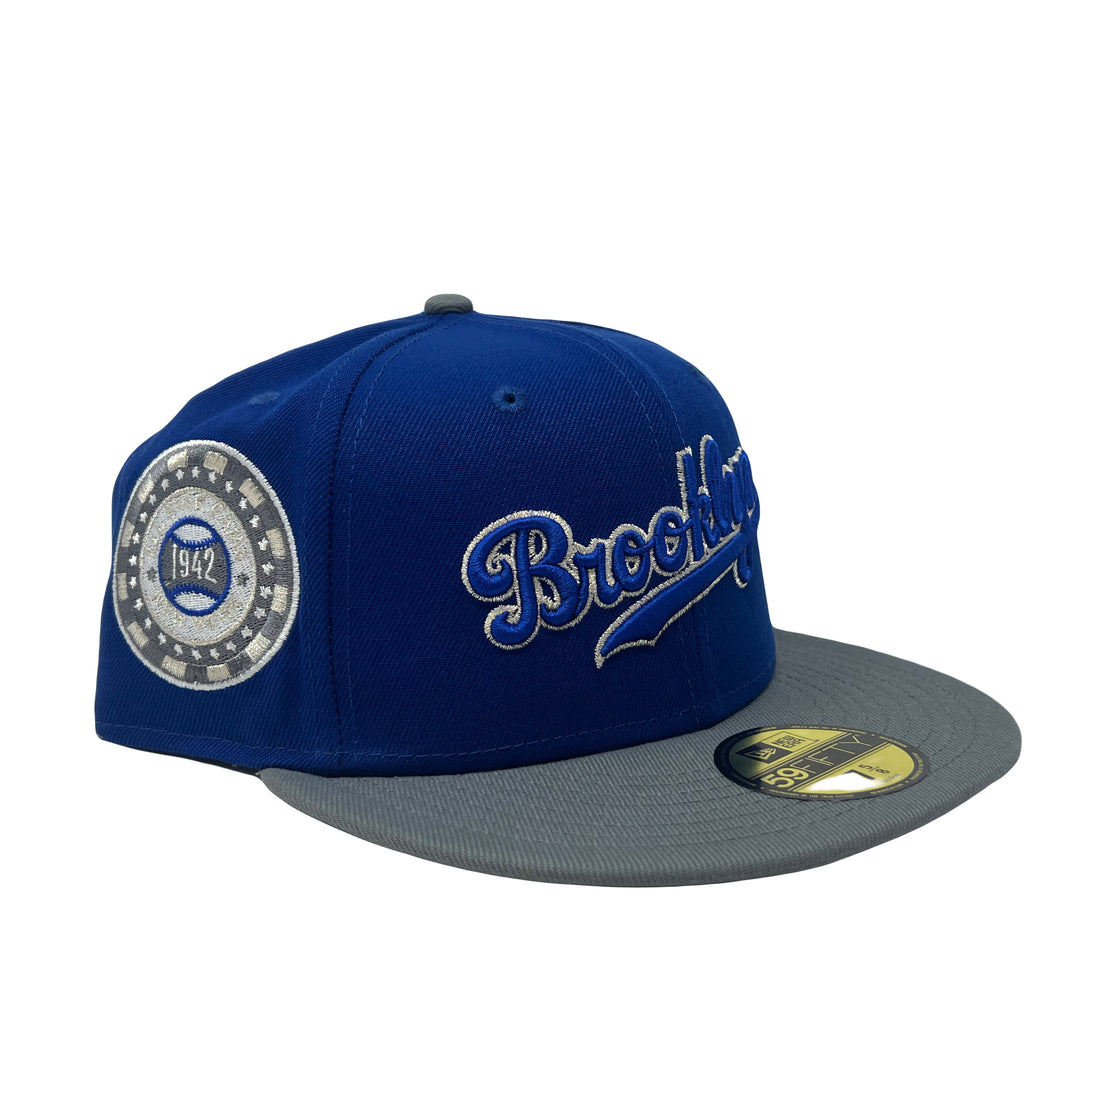 Brooklyn Dodgers 1942 All Star Game 5950 New Era Fitted Hat